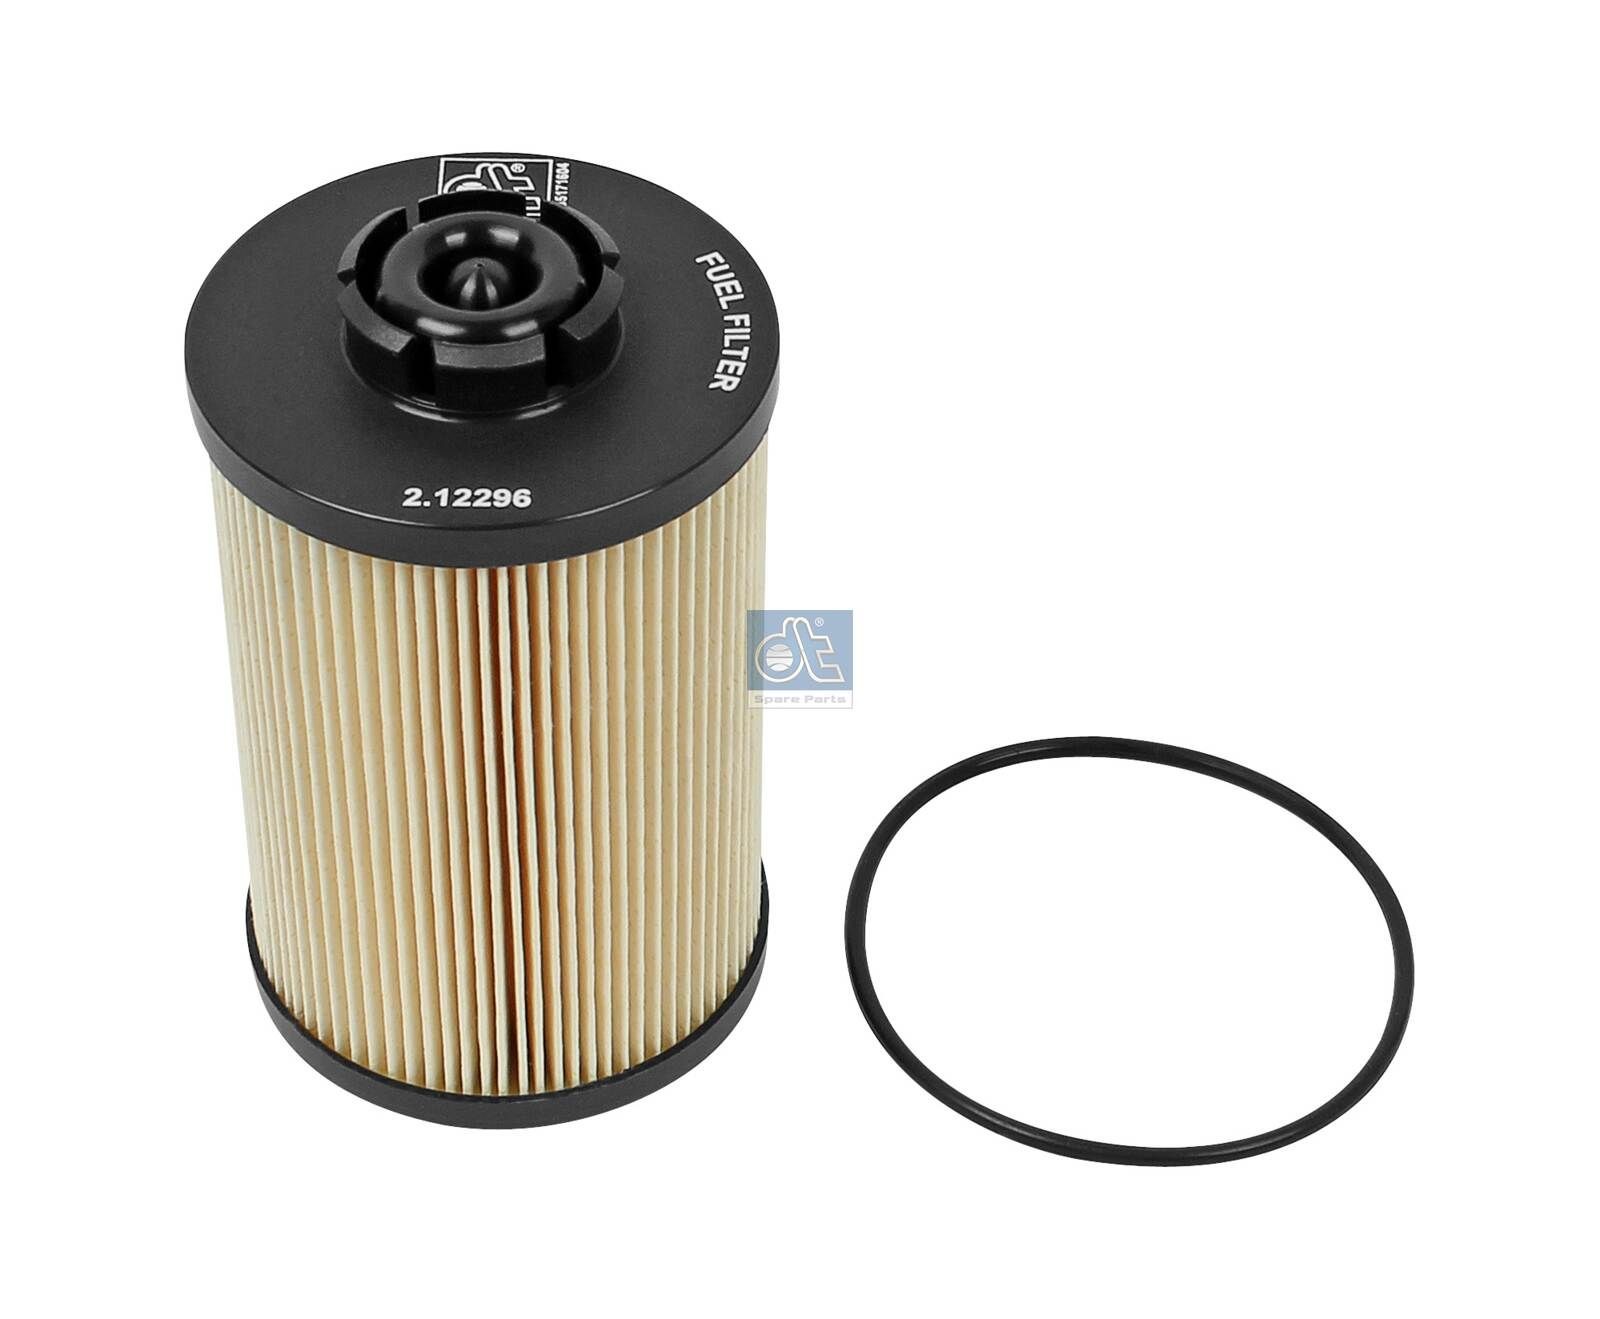 PU 1058X DT Spare Parts 2.12296 Fuel filter 20796775